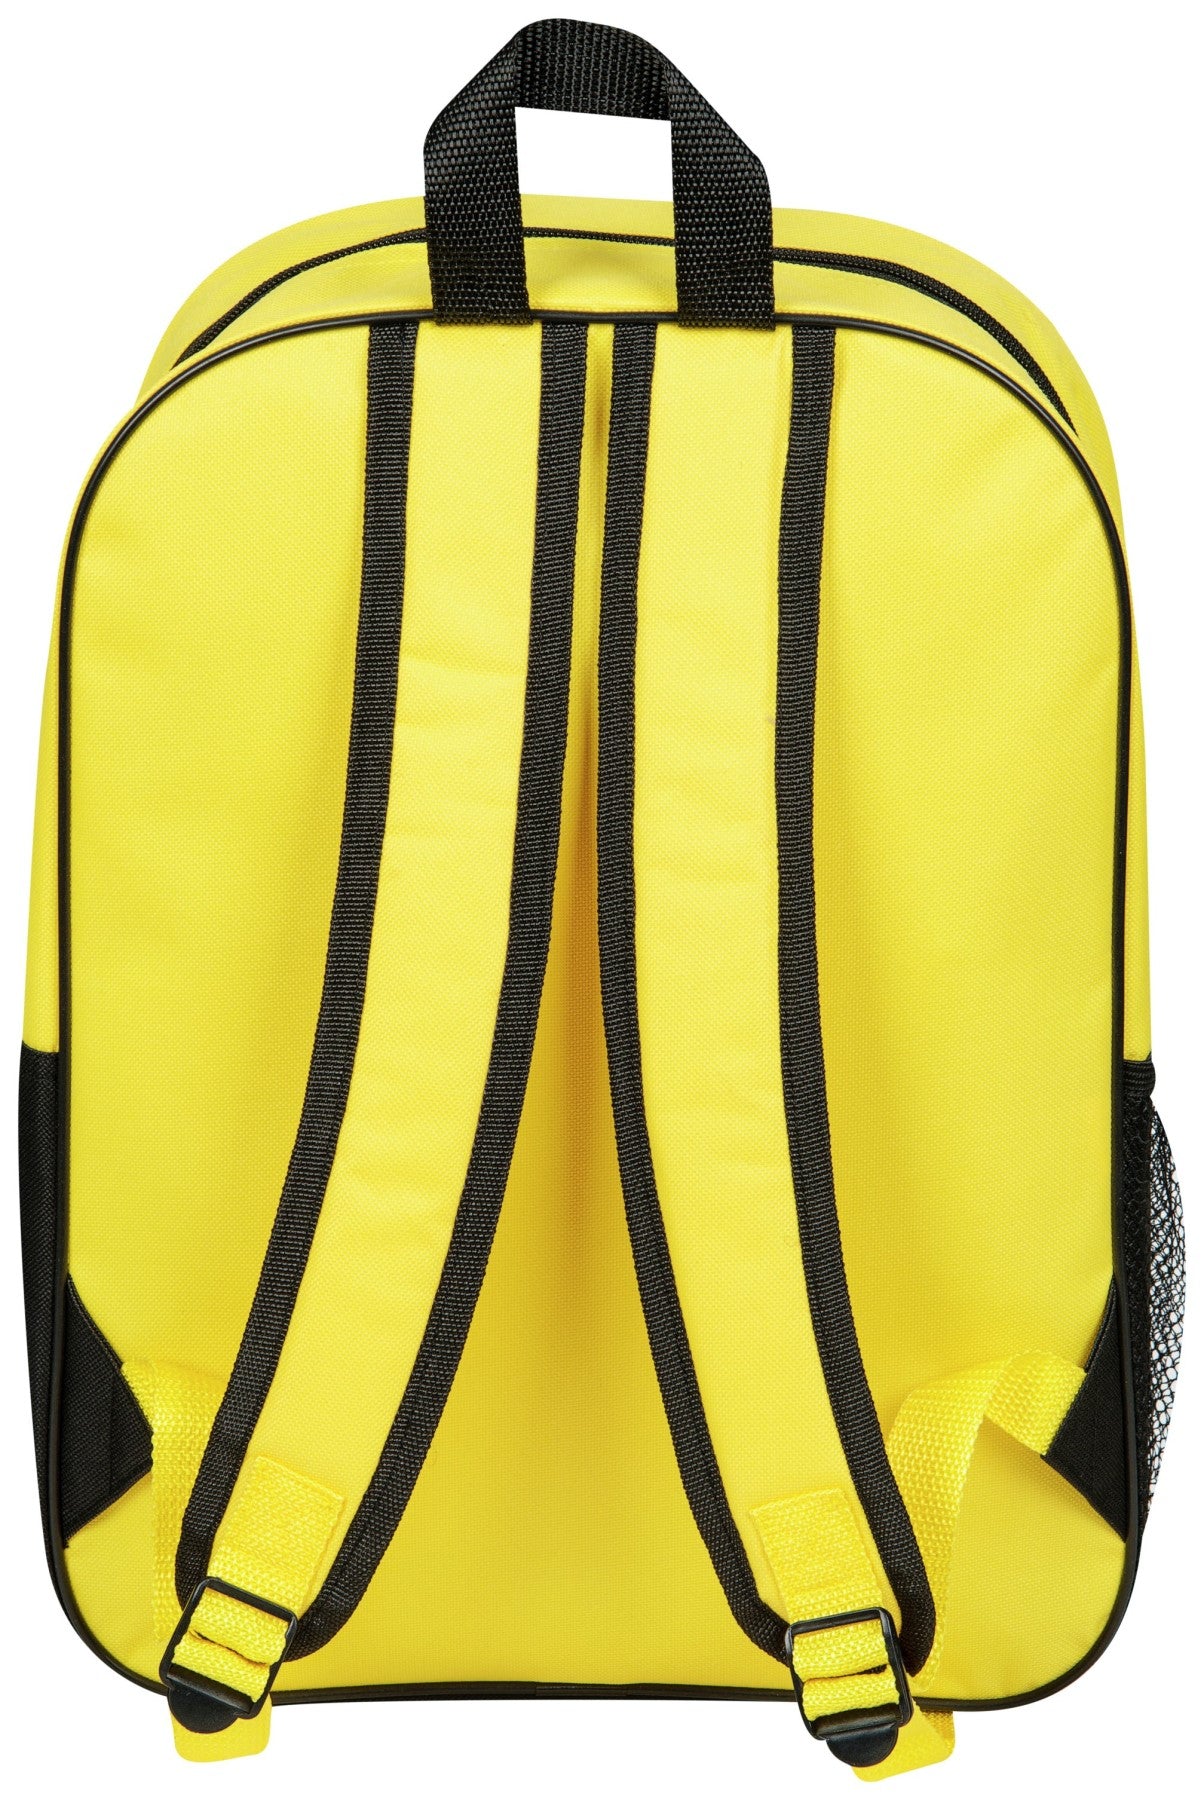 Despicable Me 3 Minions “Yellow is the new Black” Backpack